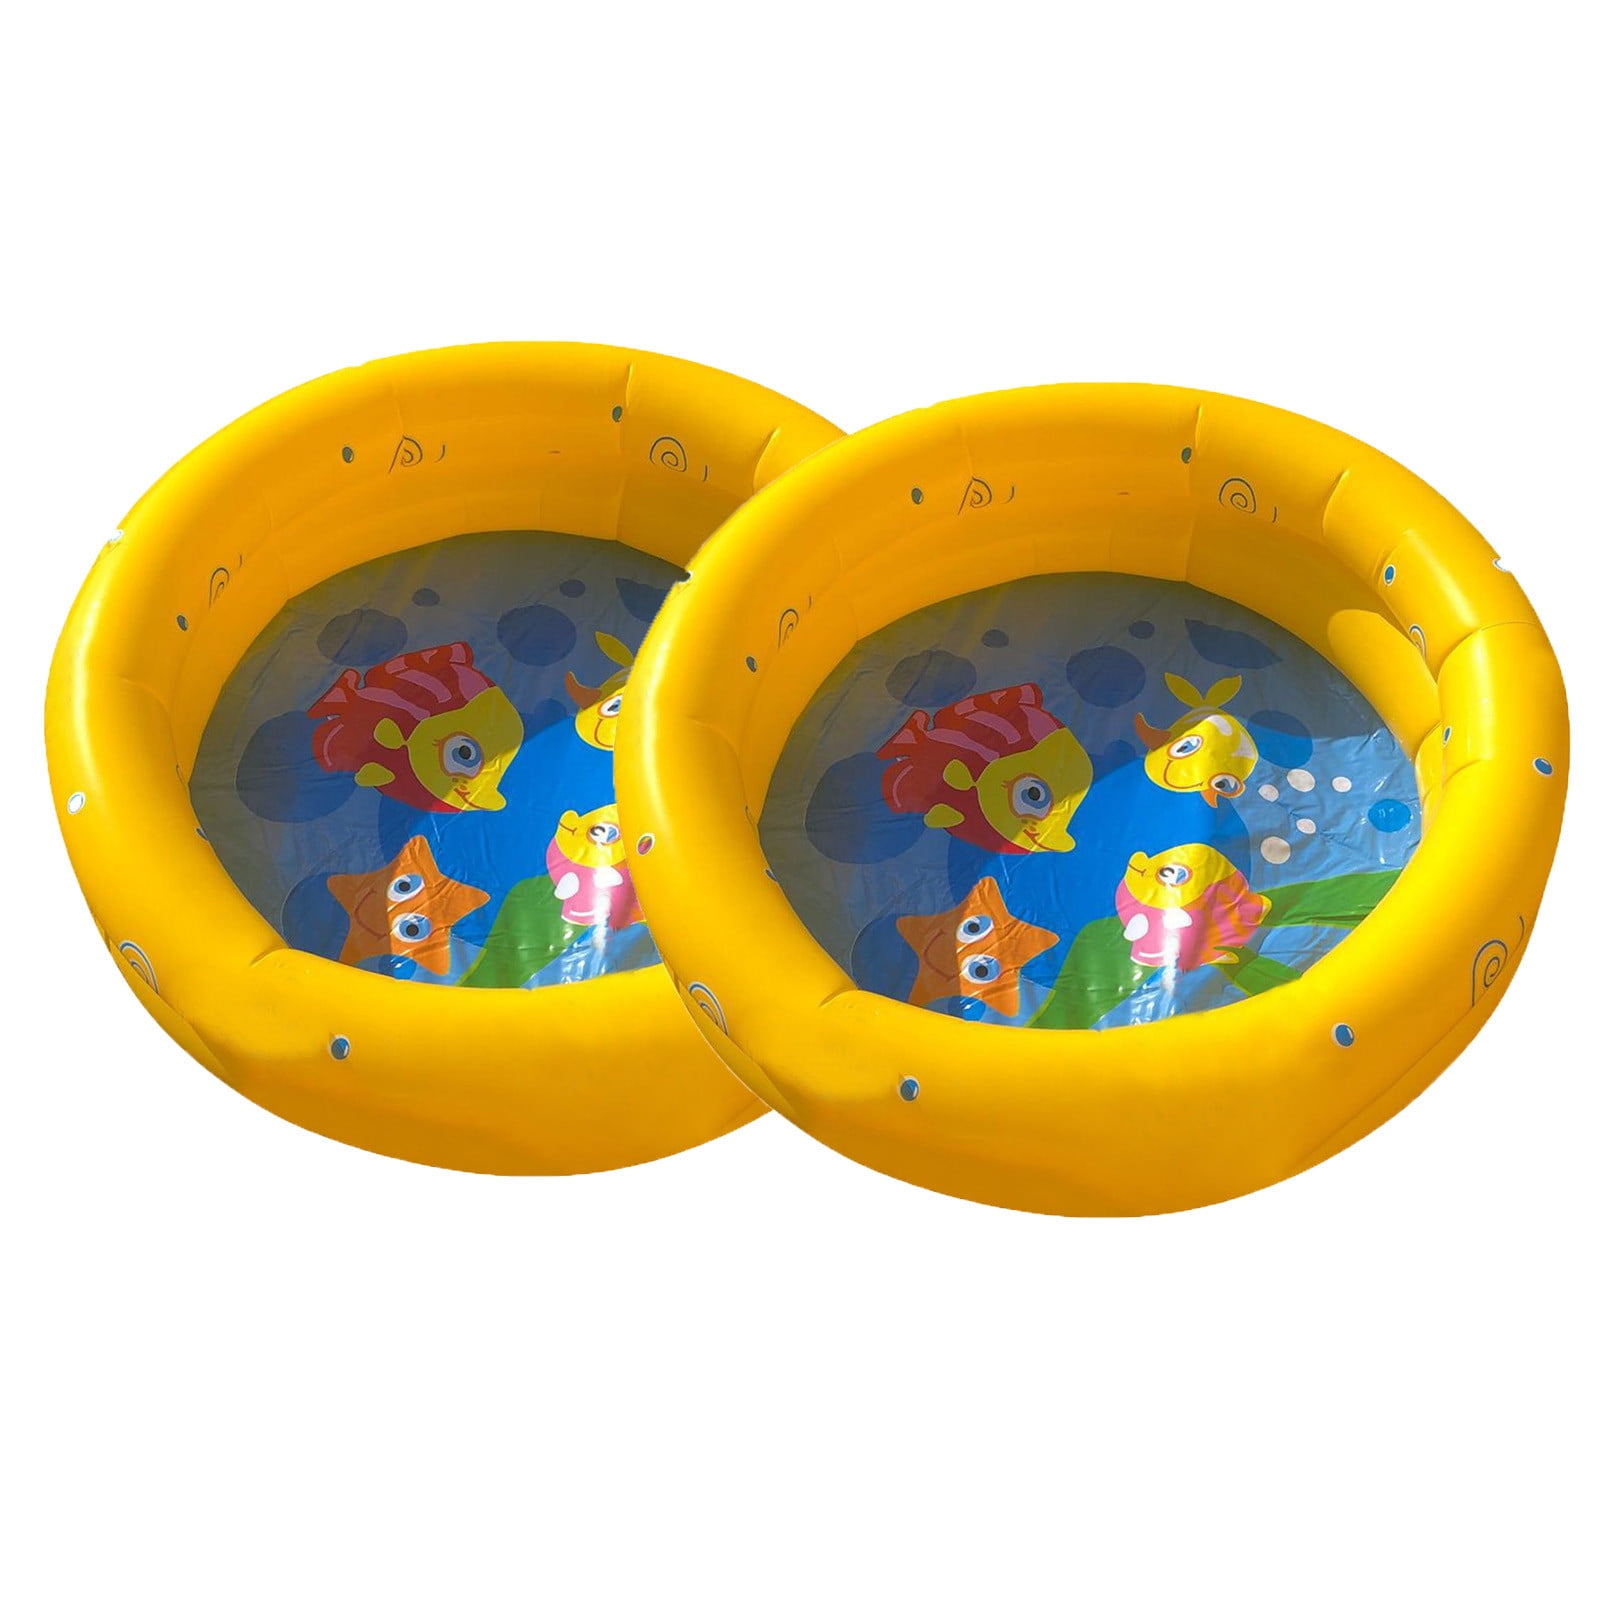 Lovely Animal Print Details about   Intex Inflatable Infant Pool or Ball Pit Yellow or Purple